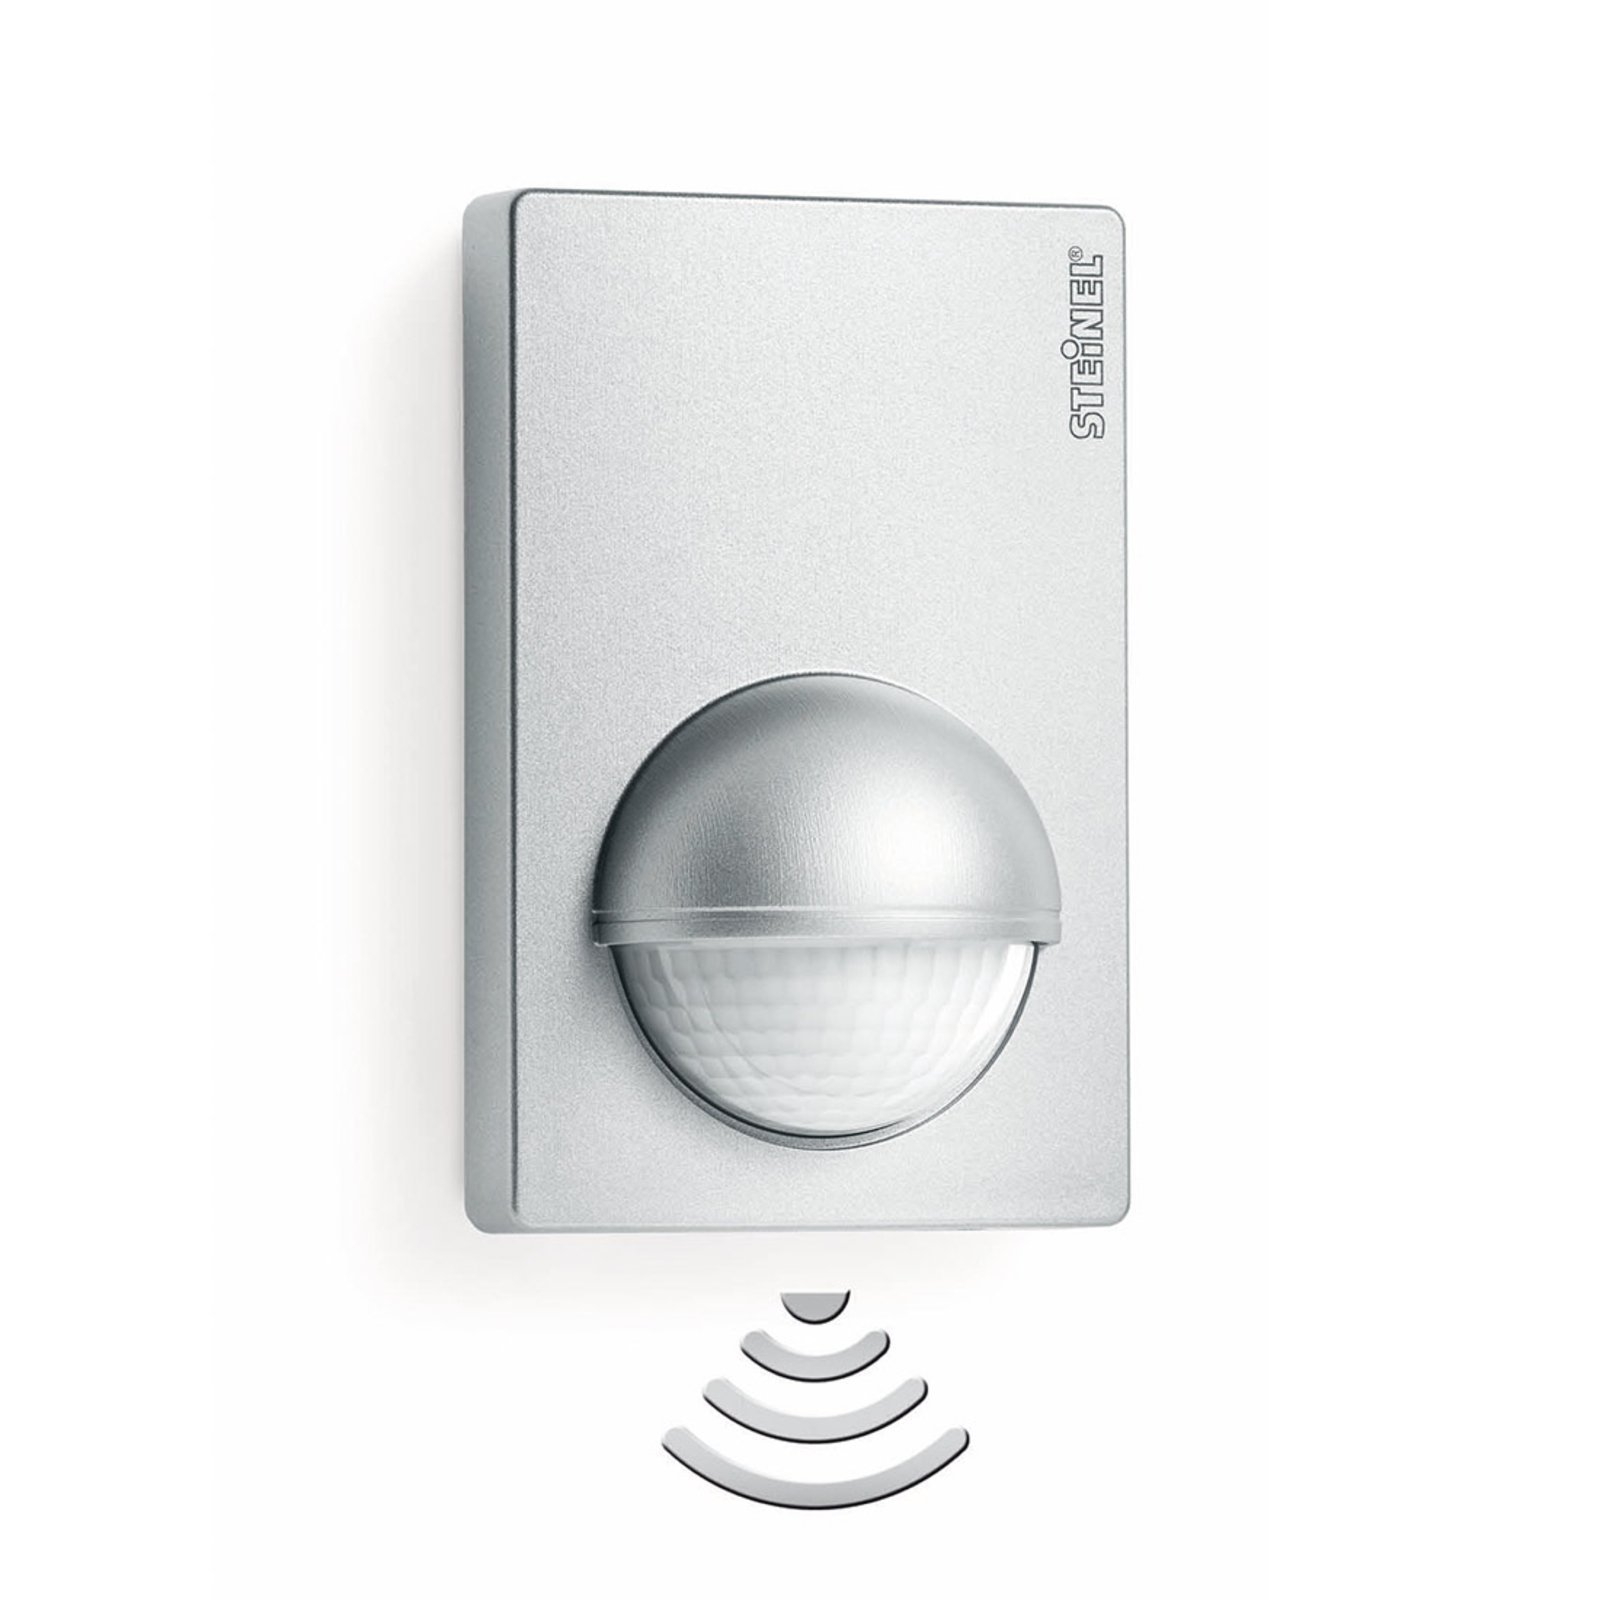 STEINEL IS 180-2 motion detector stainless steel